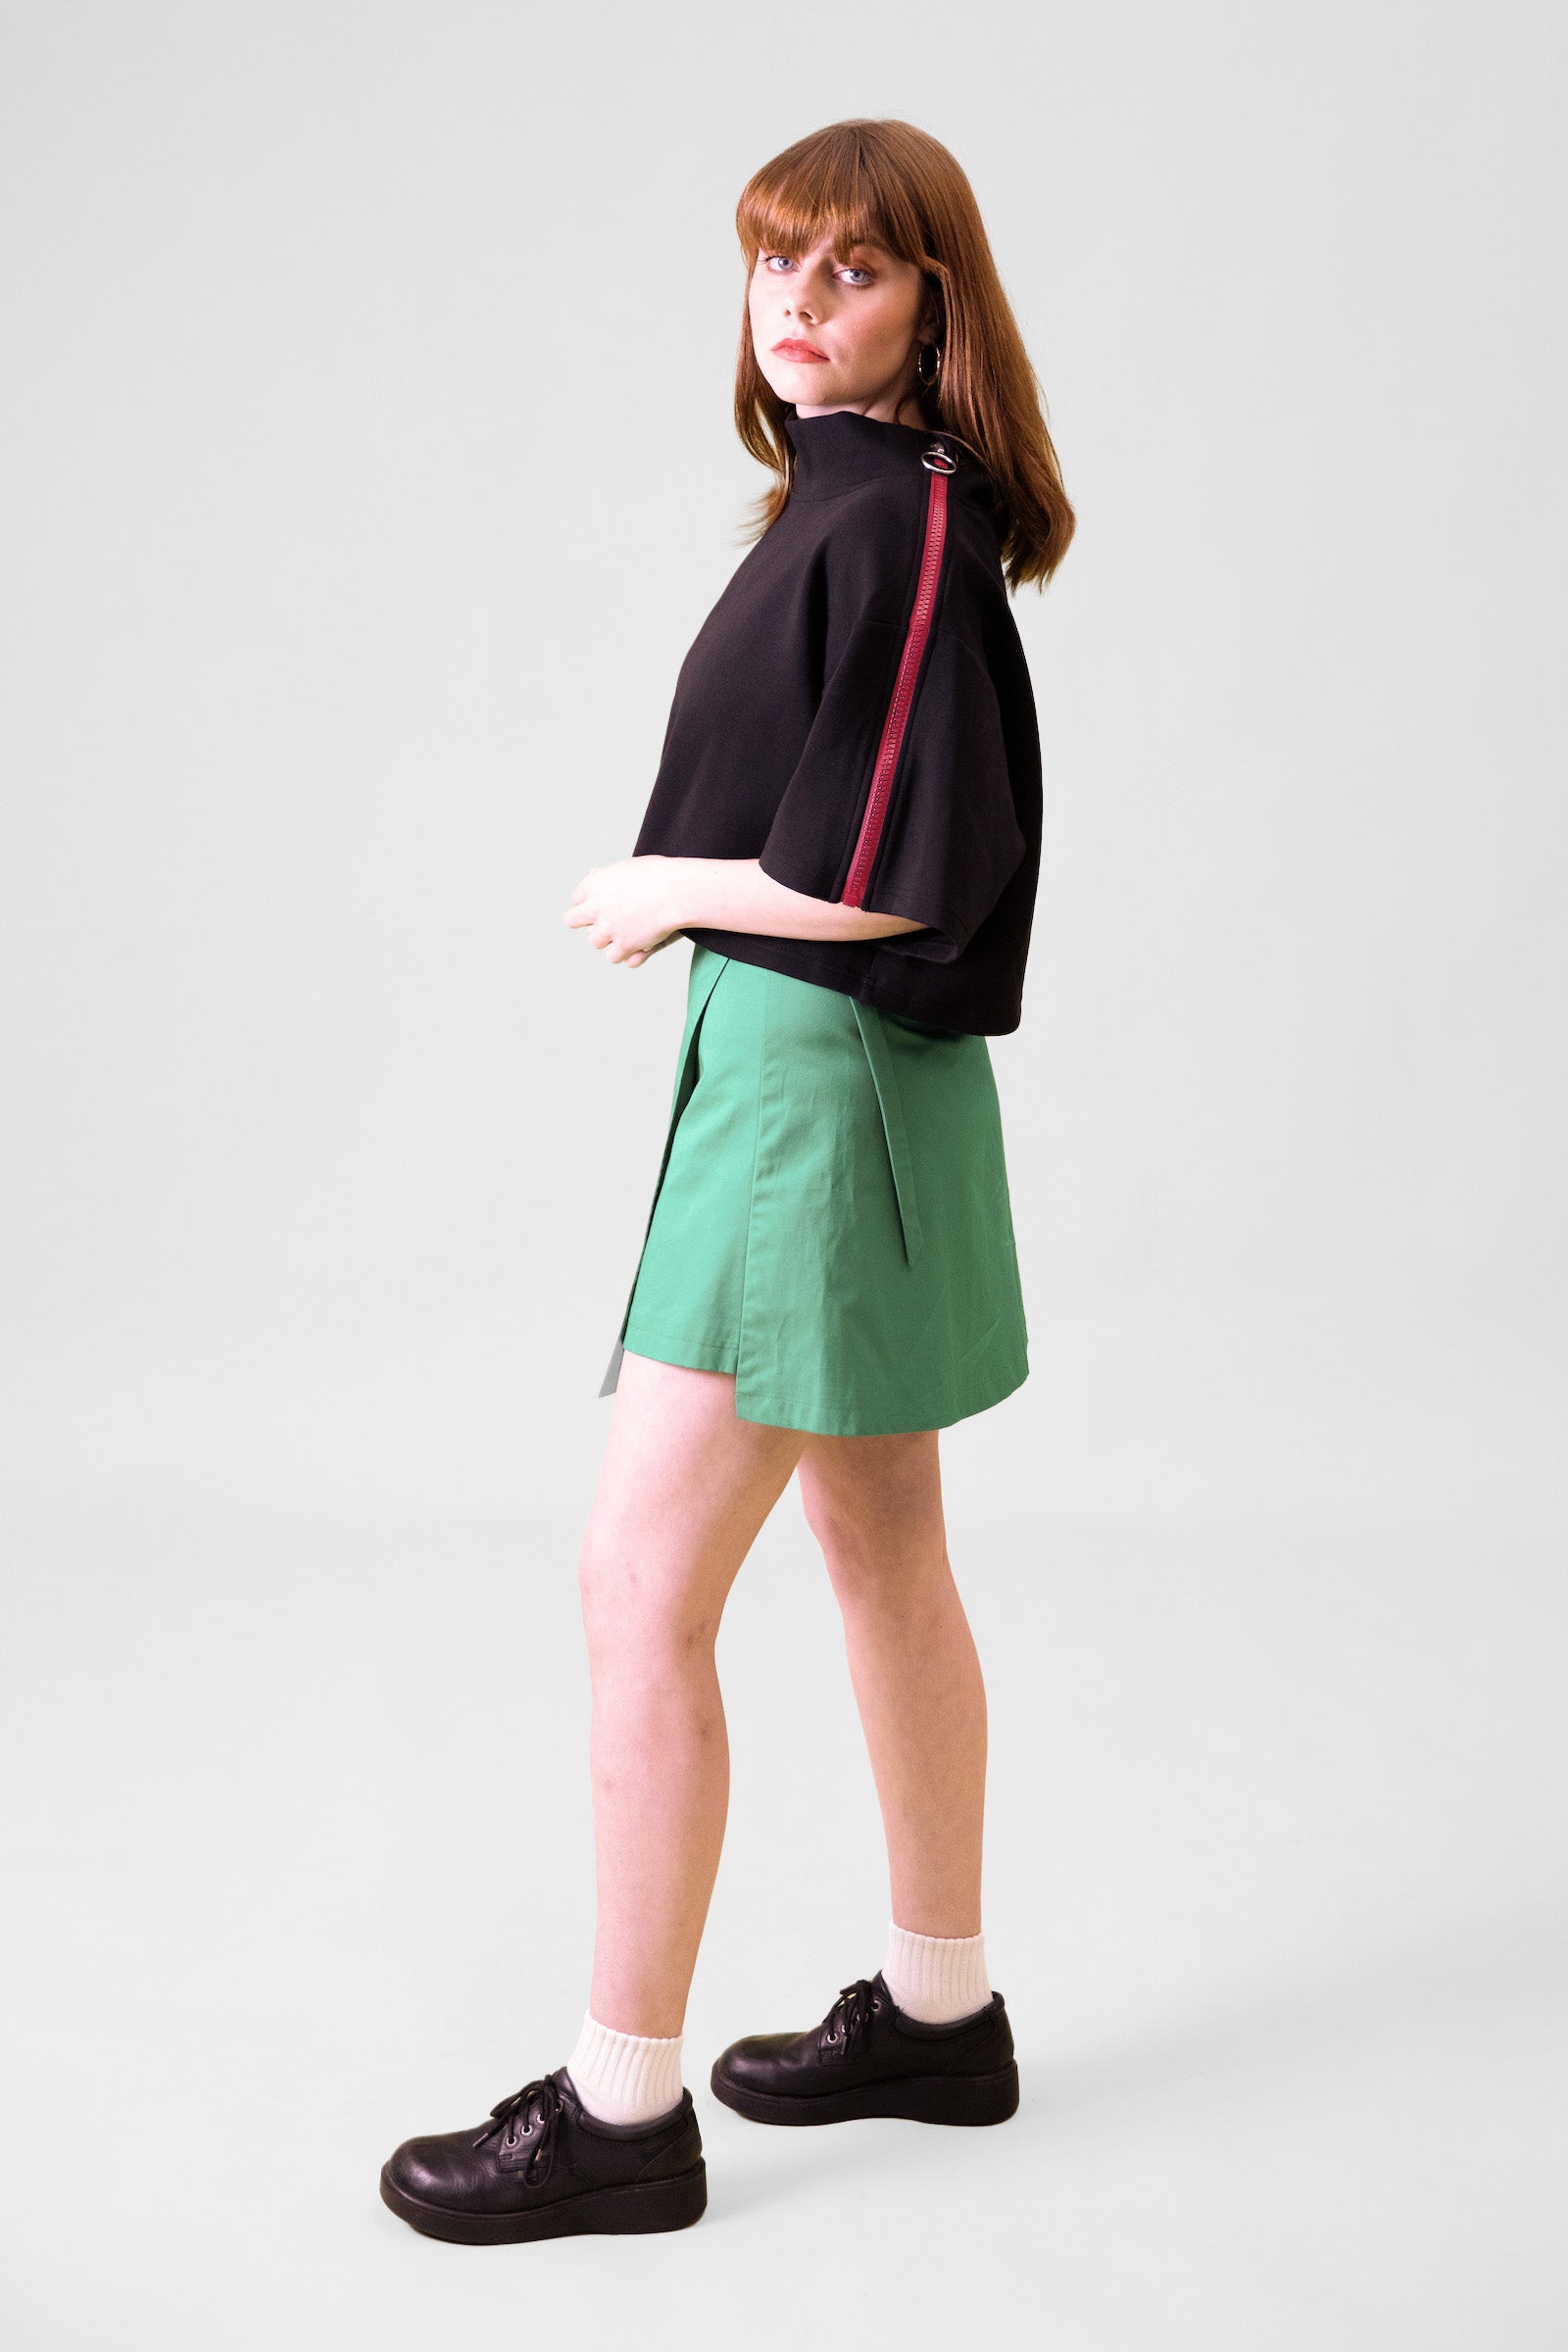 A model standing sideways in front of a grey background facing backwards towards the wall wearing a black cropped top and green wrap skirt with black shoes and white socks #Standing